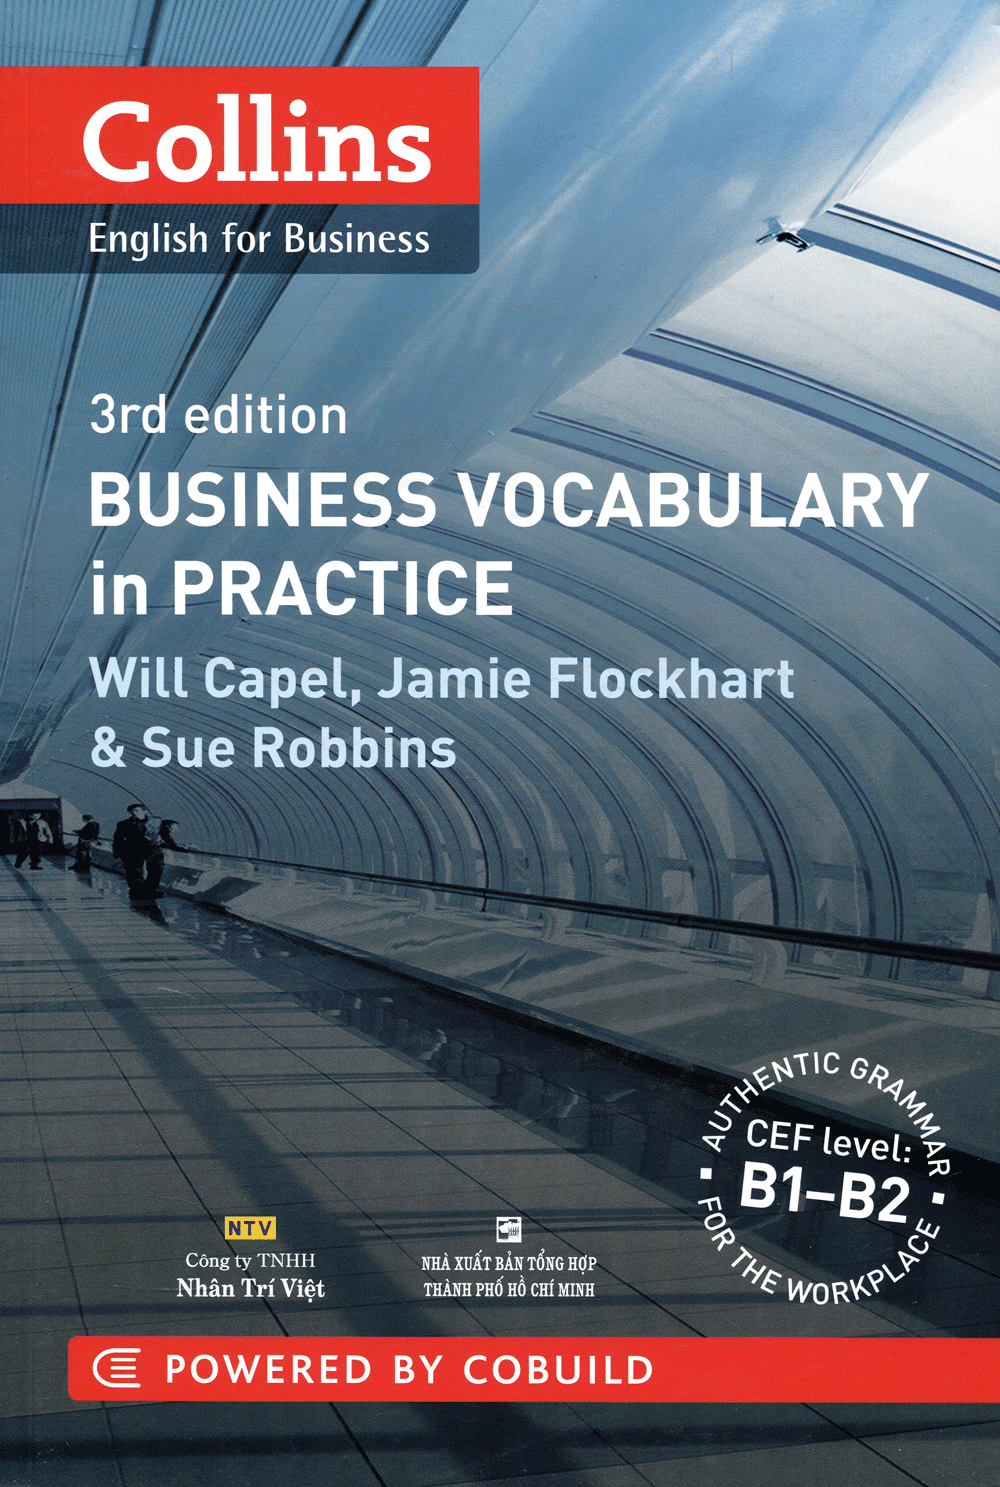 Collins - English For Business - Business Vocabulary In Practice